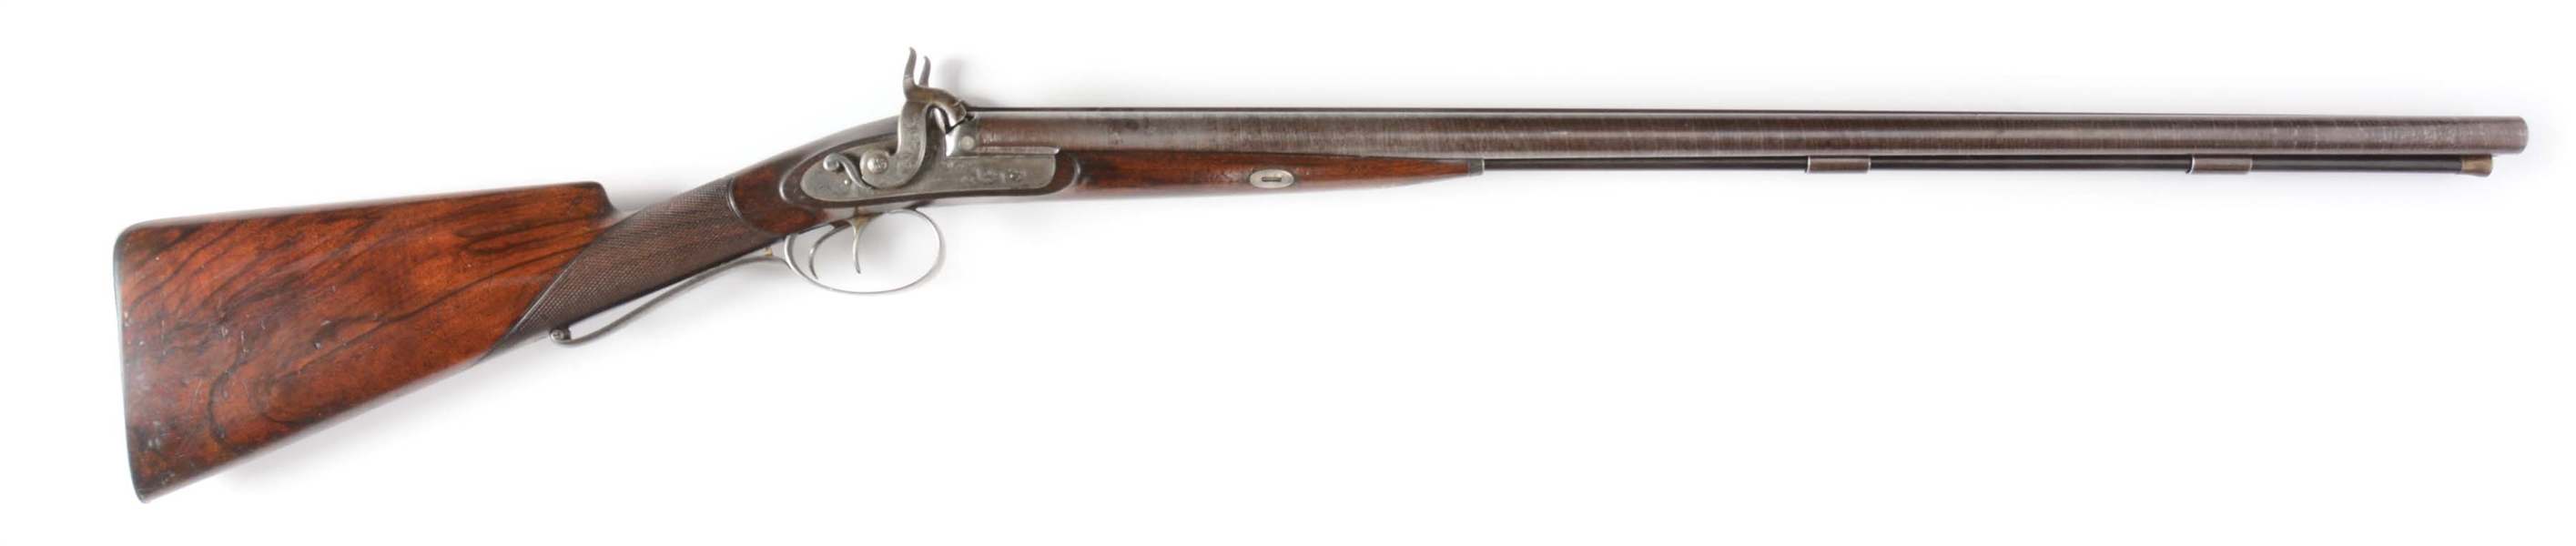 (A) EARLY JAMES PURDEY PERCUSSION DOUBLE SHOTGUN INCORPORATING WYATTS PATENT GRIP SAFETY WITH EXTERNAL INTERCEPTING SEARS.